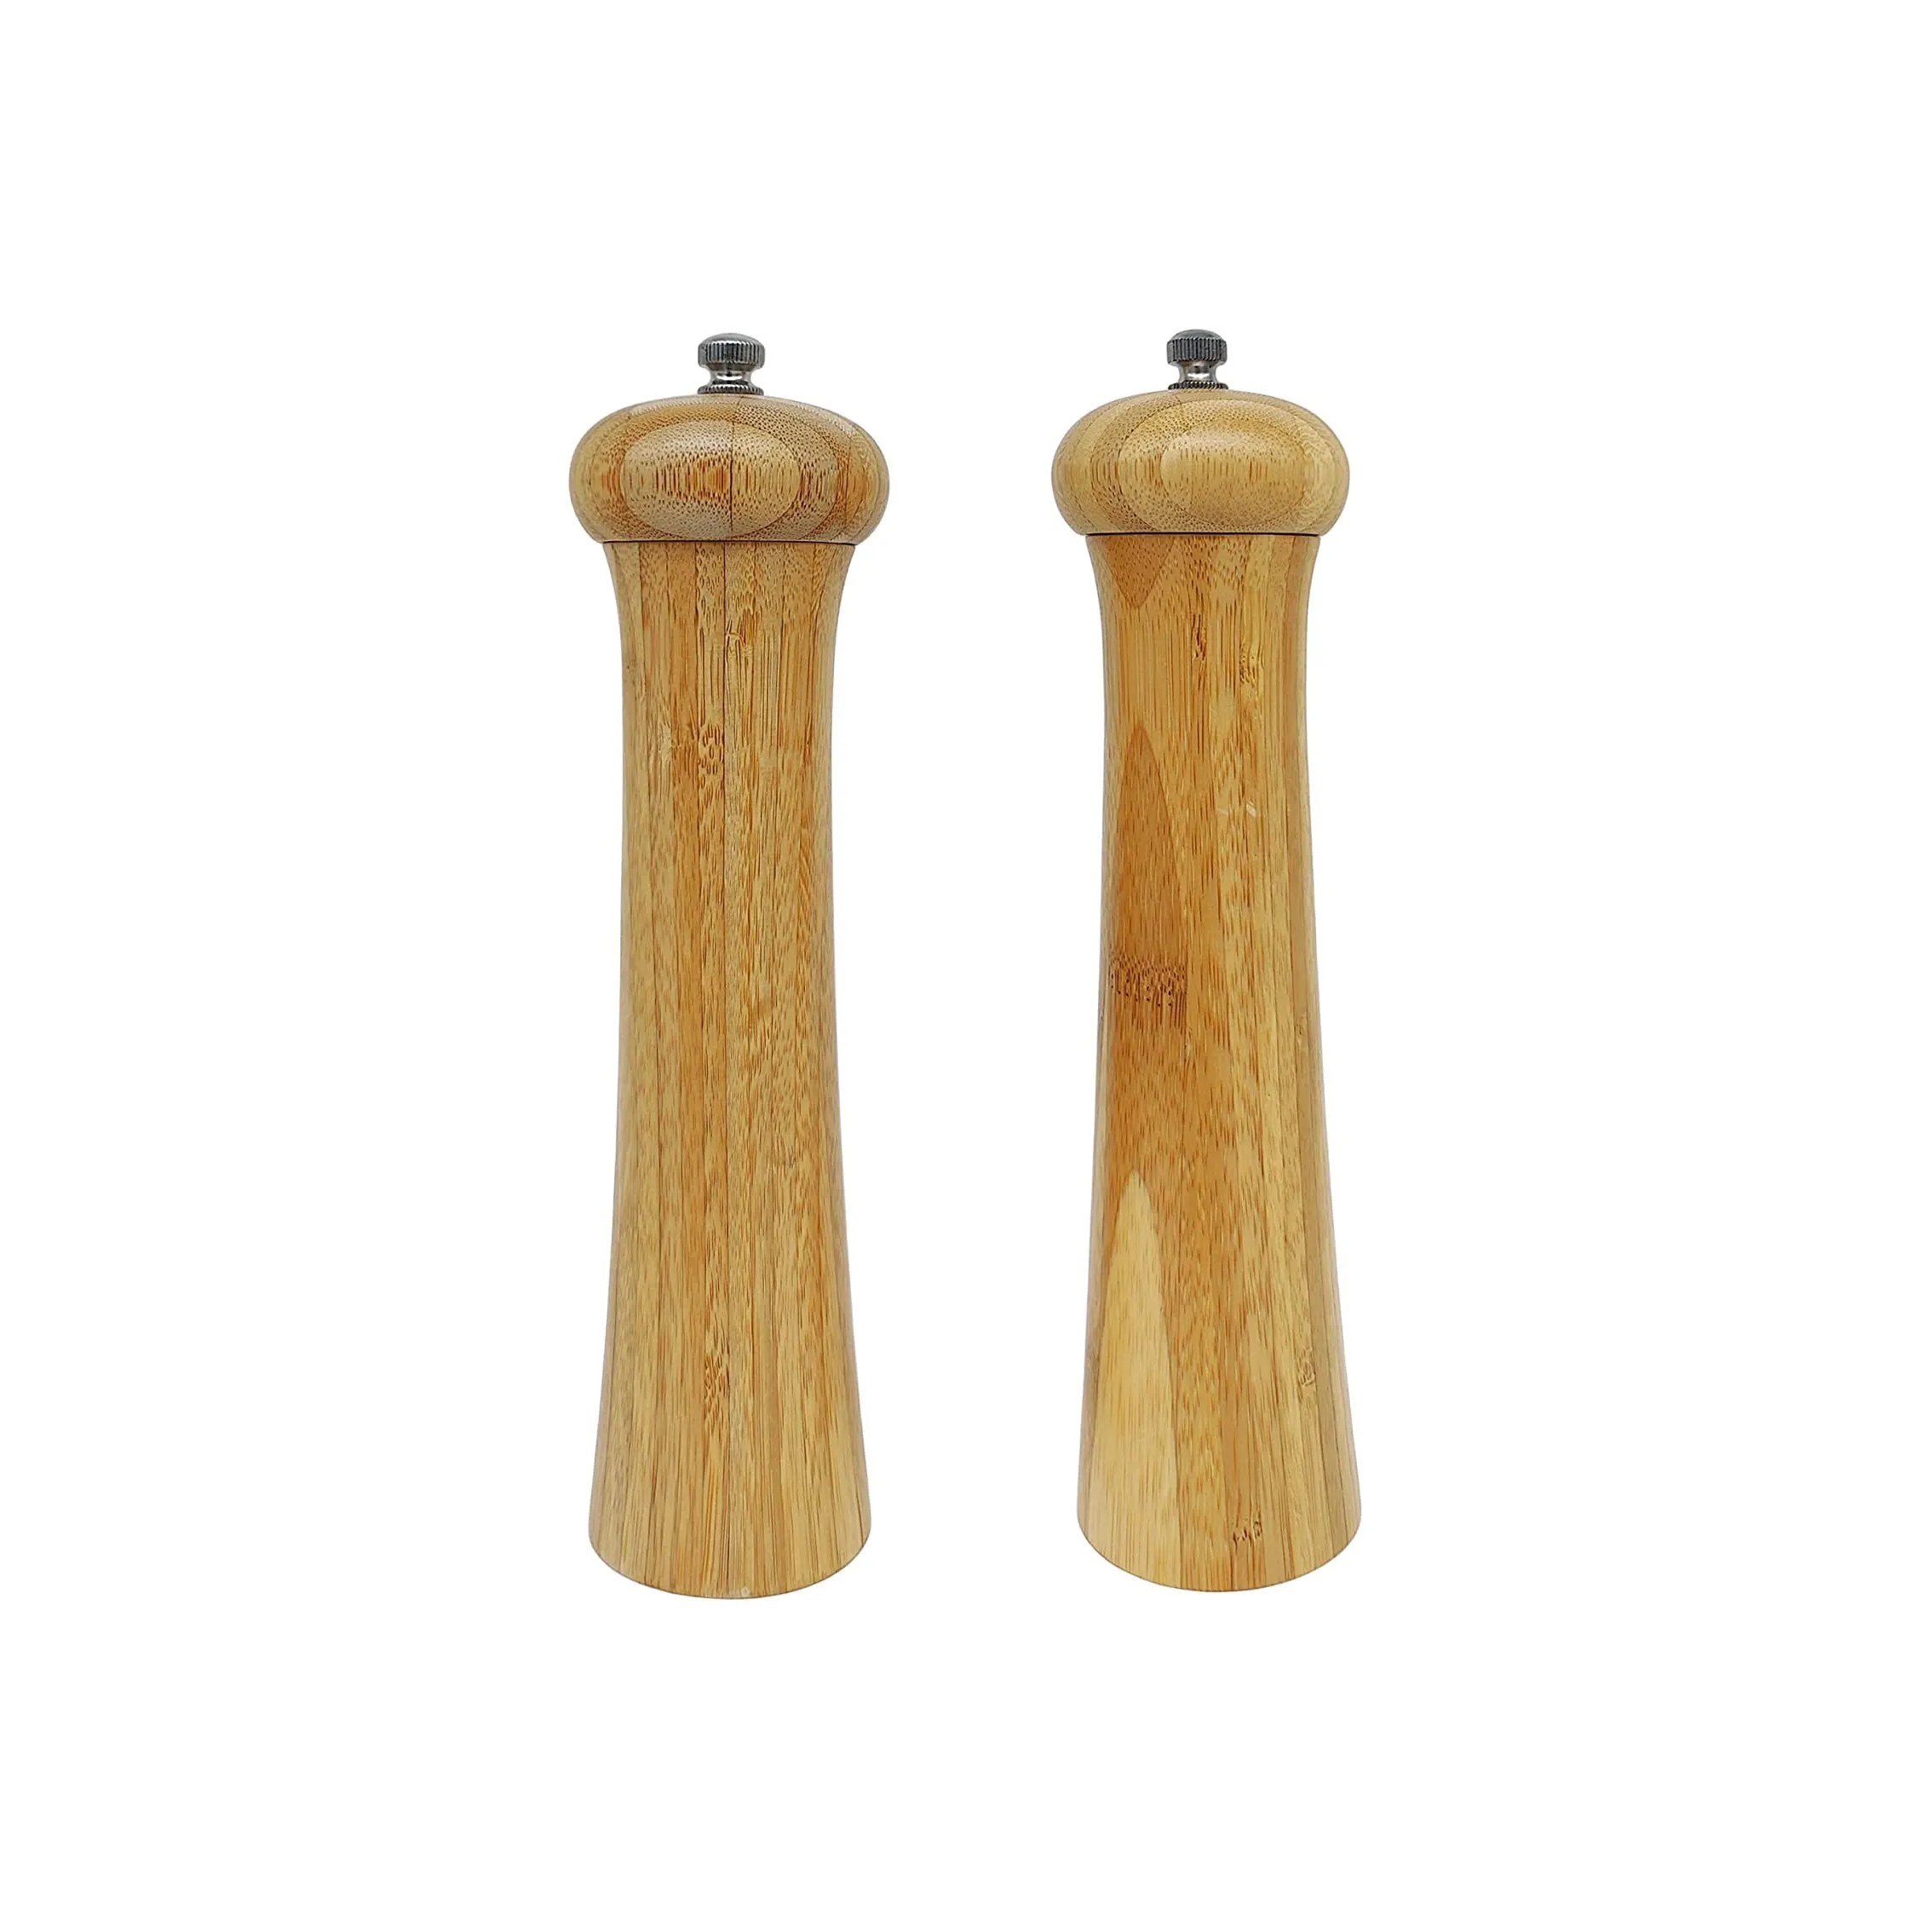 Promotion 100% Nature Organic Bamboo Pepper Mill Salt And Pepper Grinders